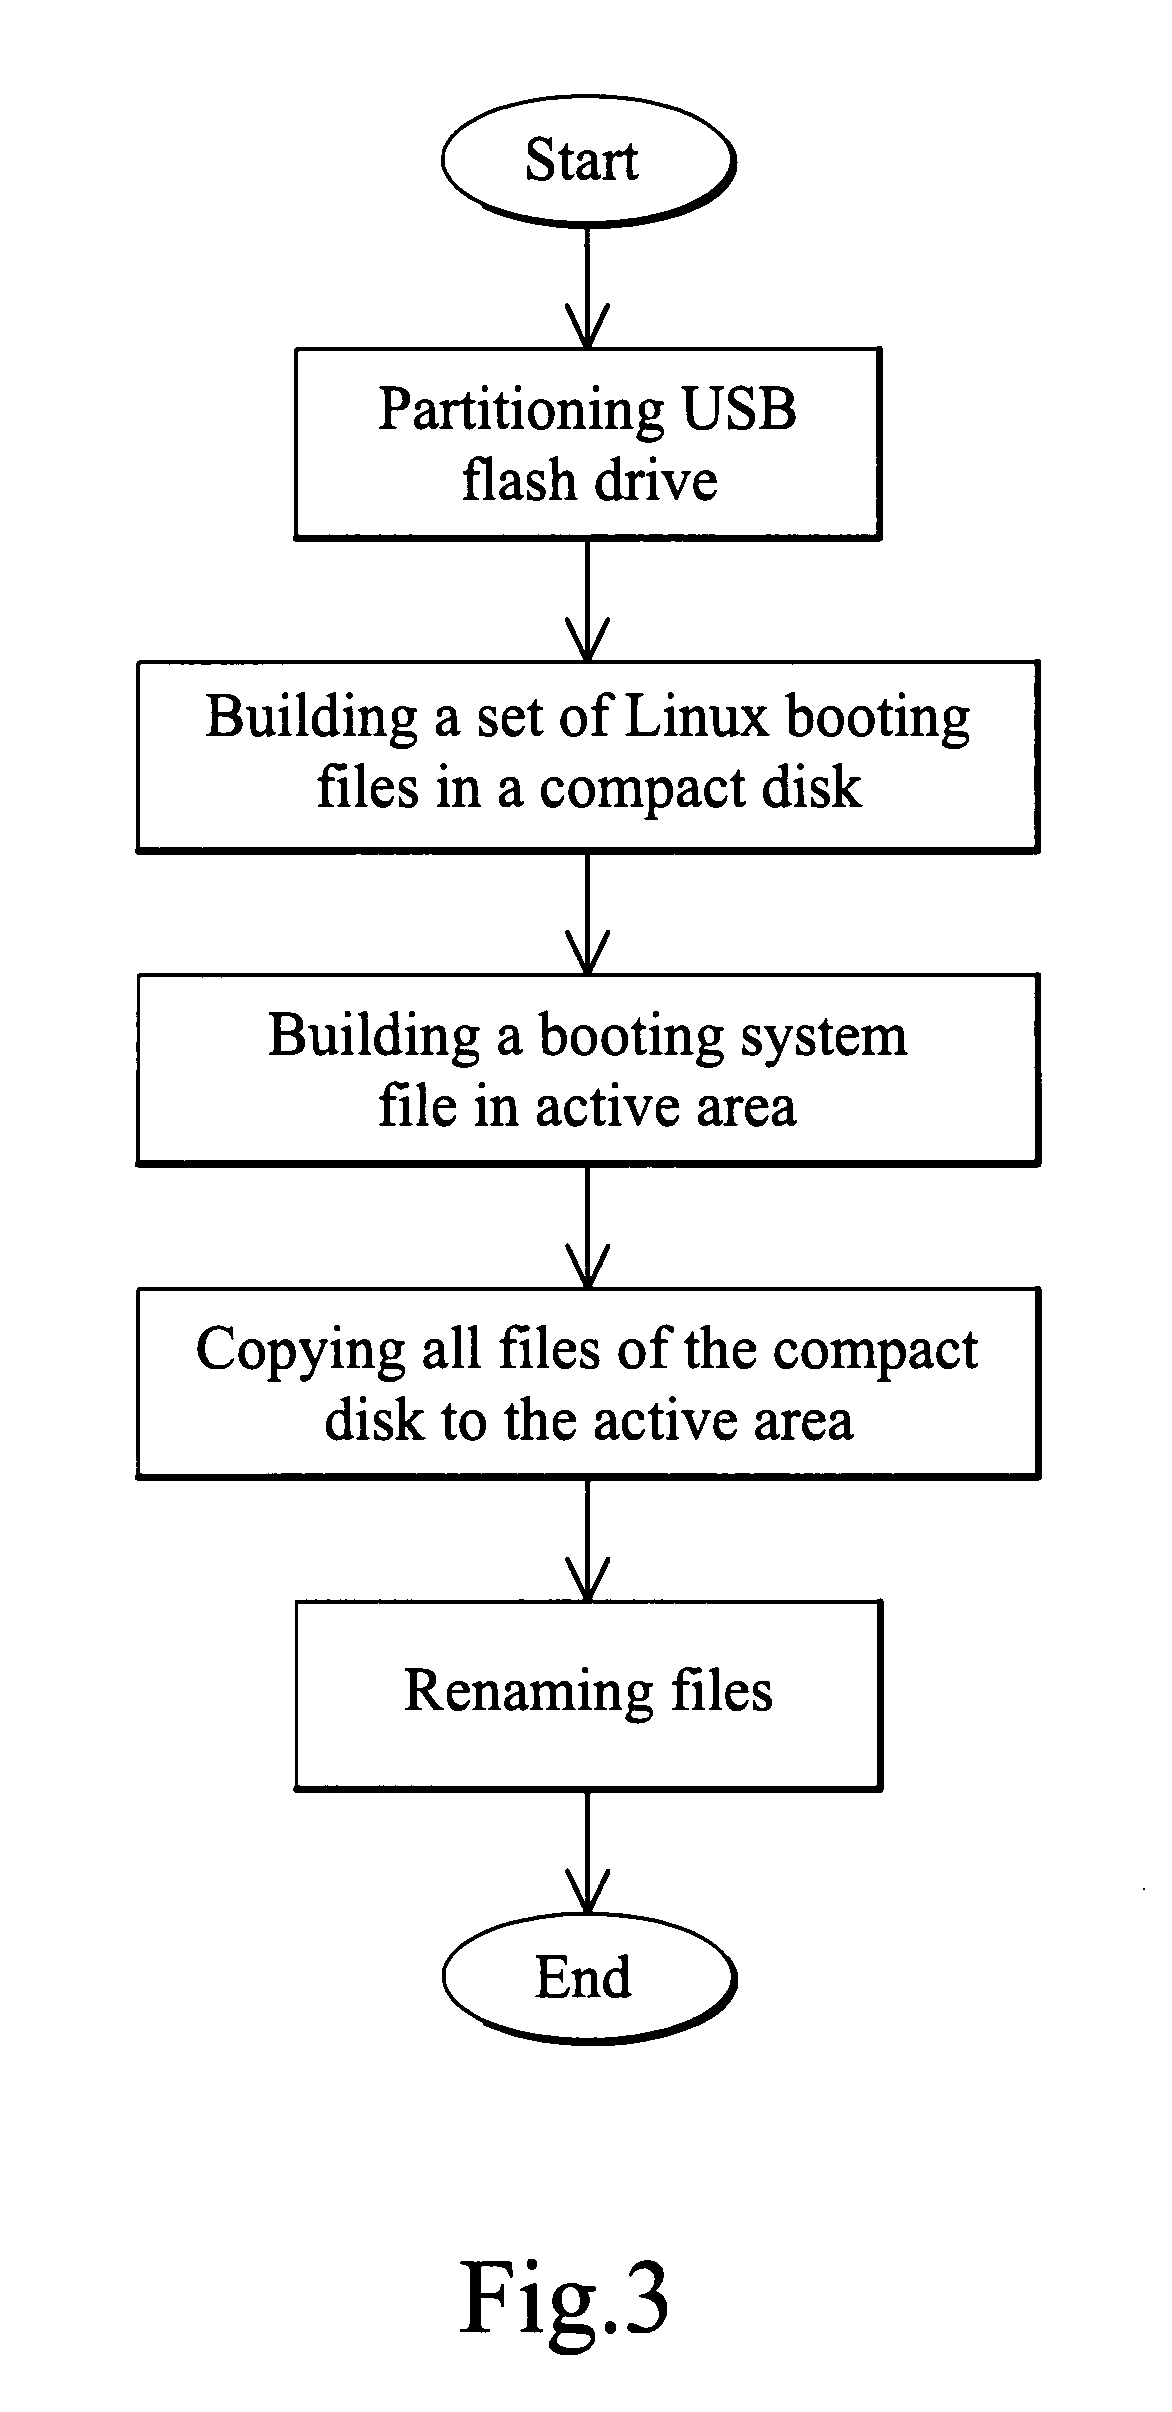 Universal serial bus flash drive for booting computer and method for loading programs to the flash drive